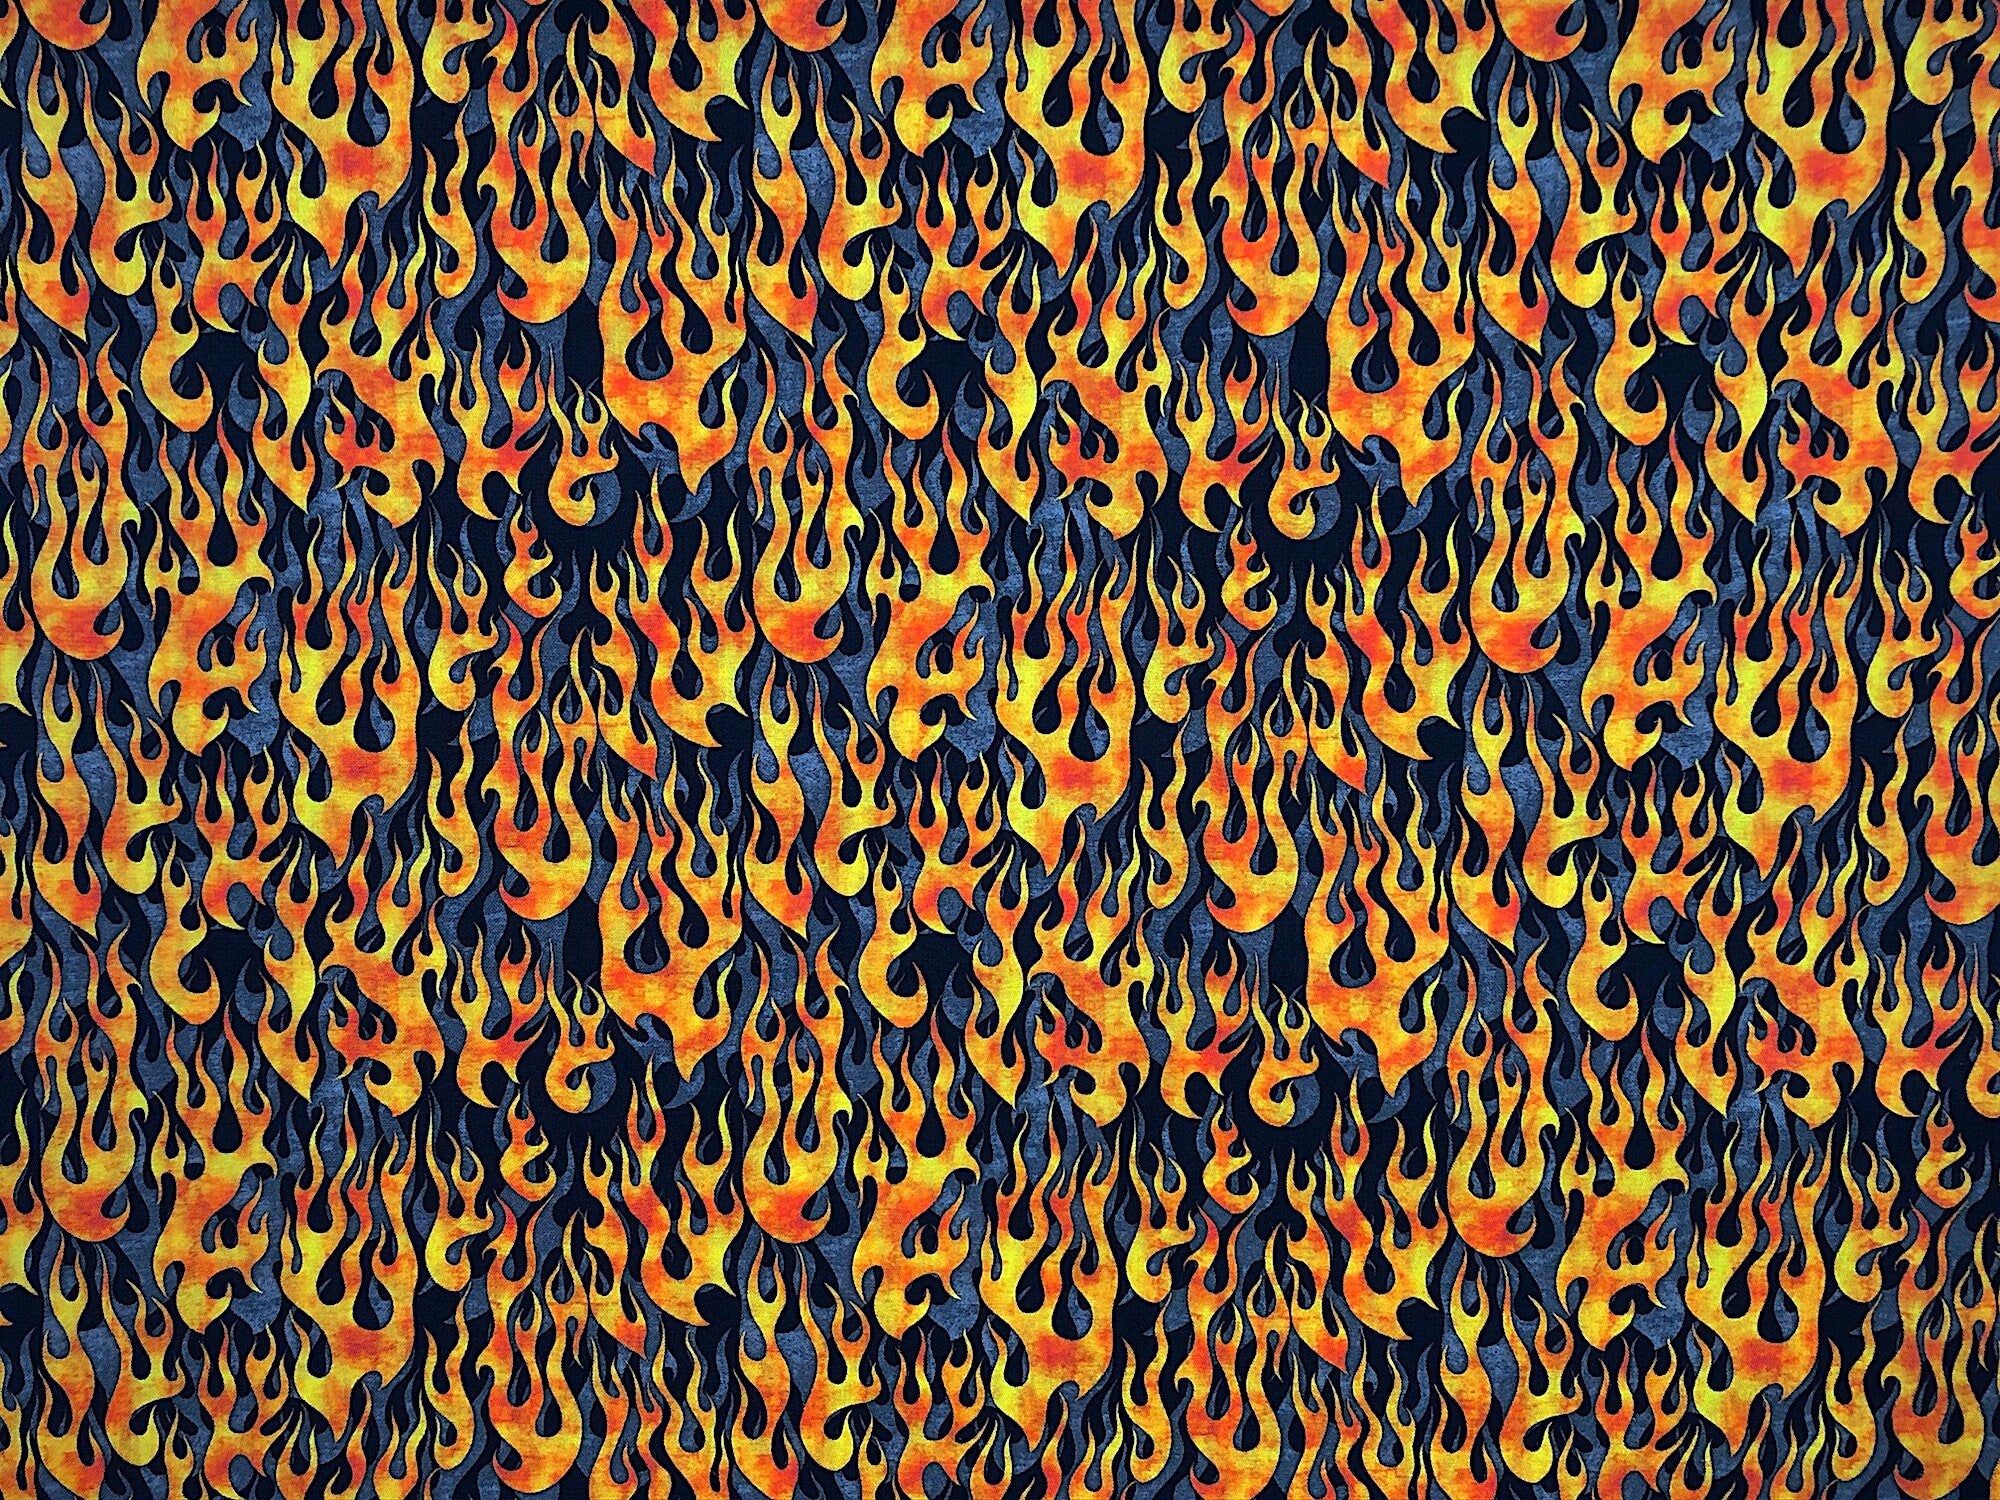 This black and gray fabric is part of the 5 Alarm collection and is covered with flames.